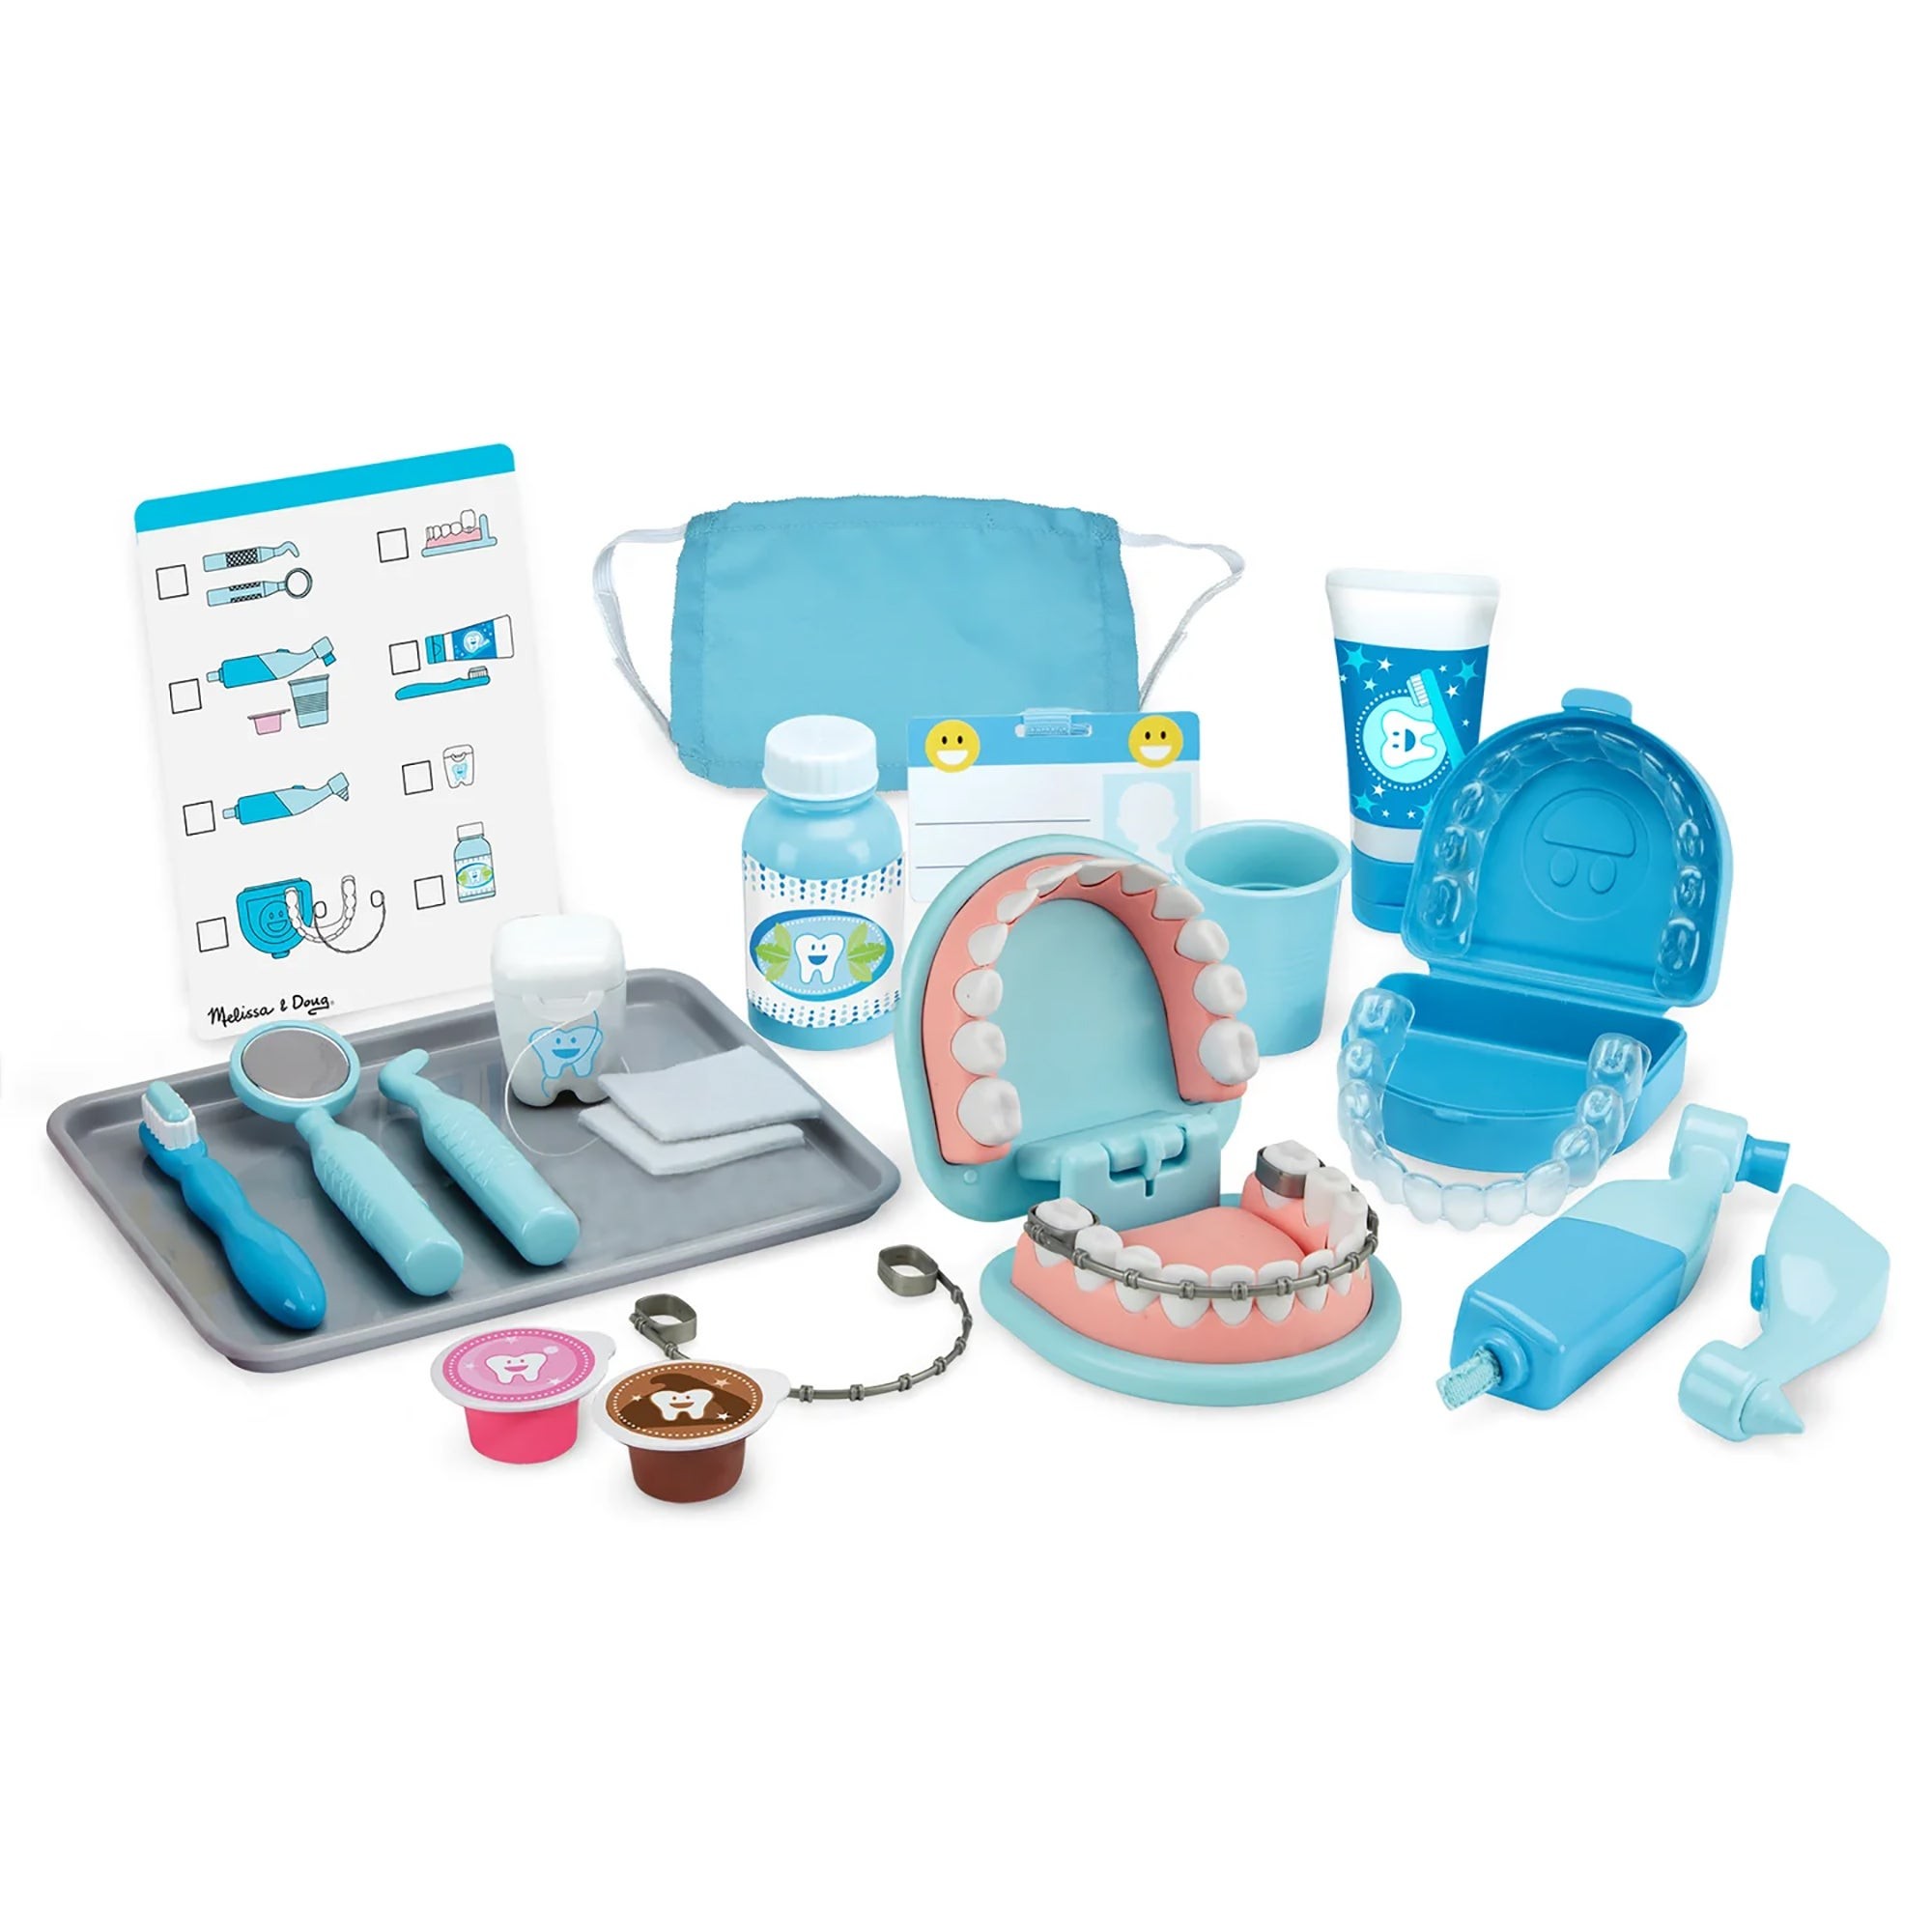 Super Smile Dentist Play Set Ages 3+ Years